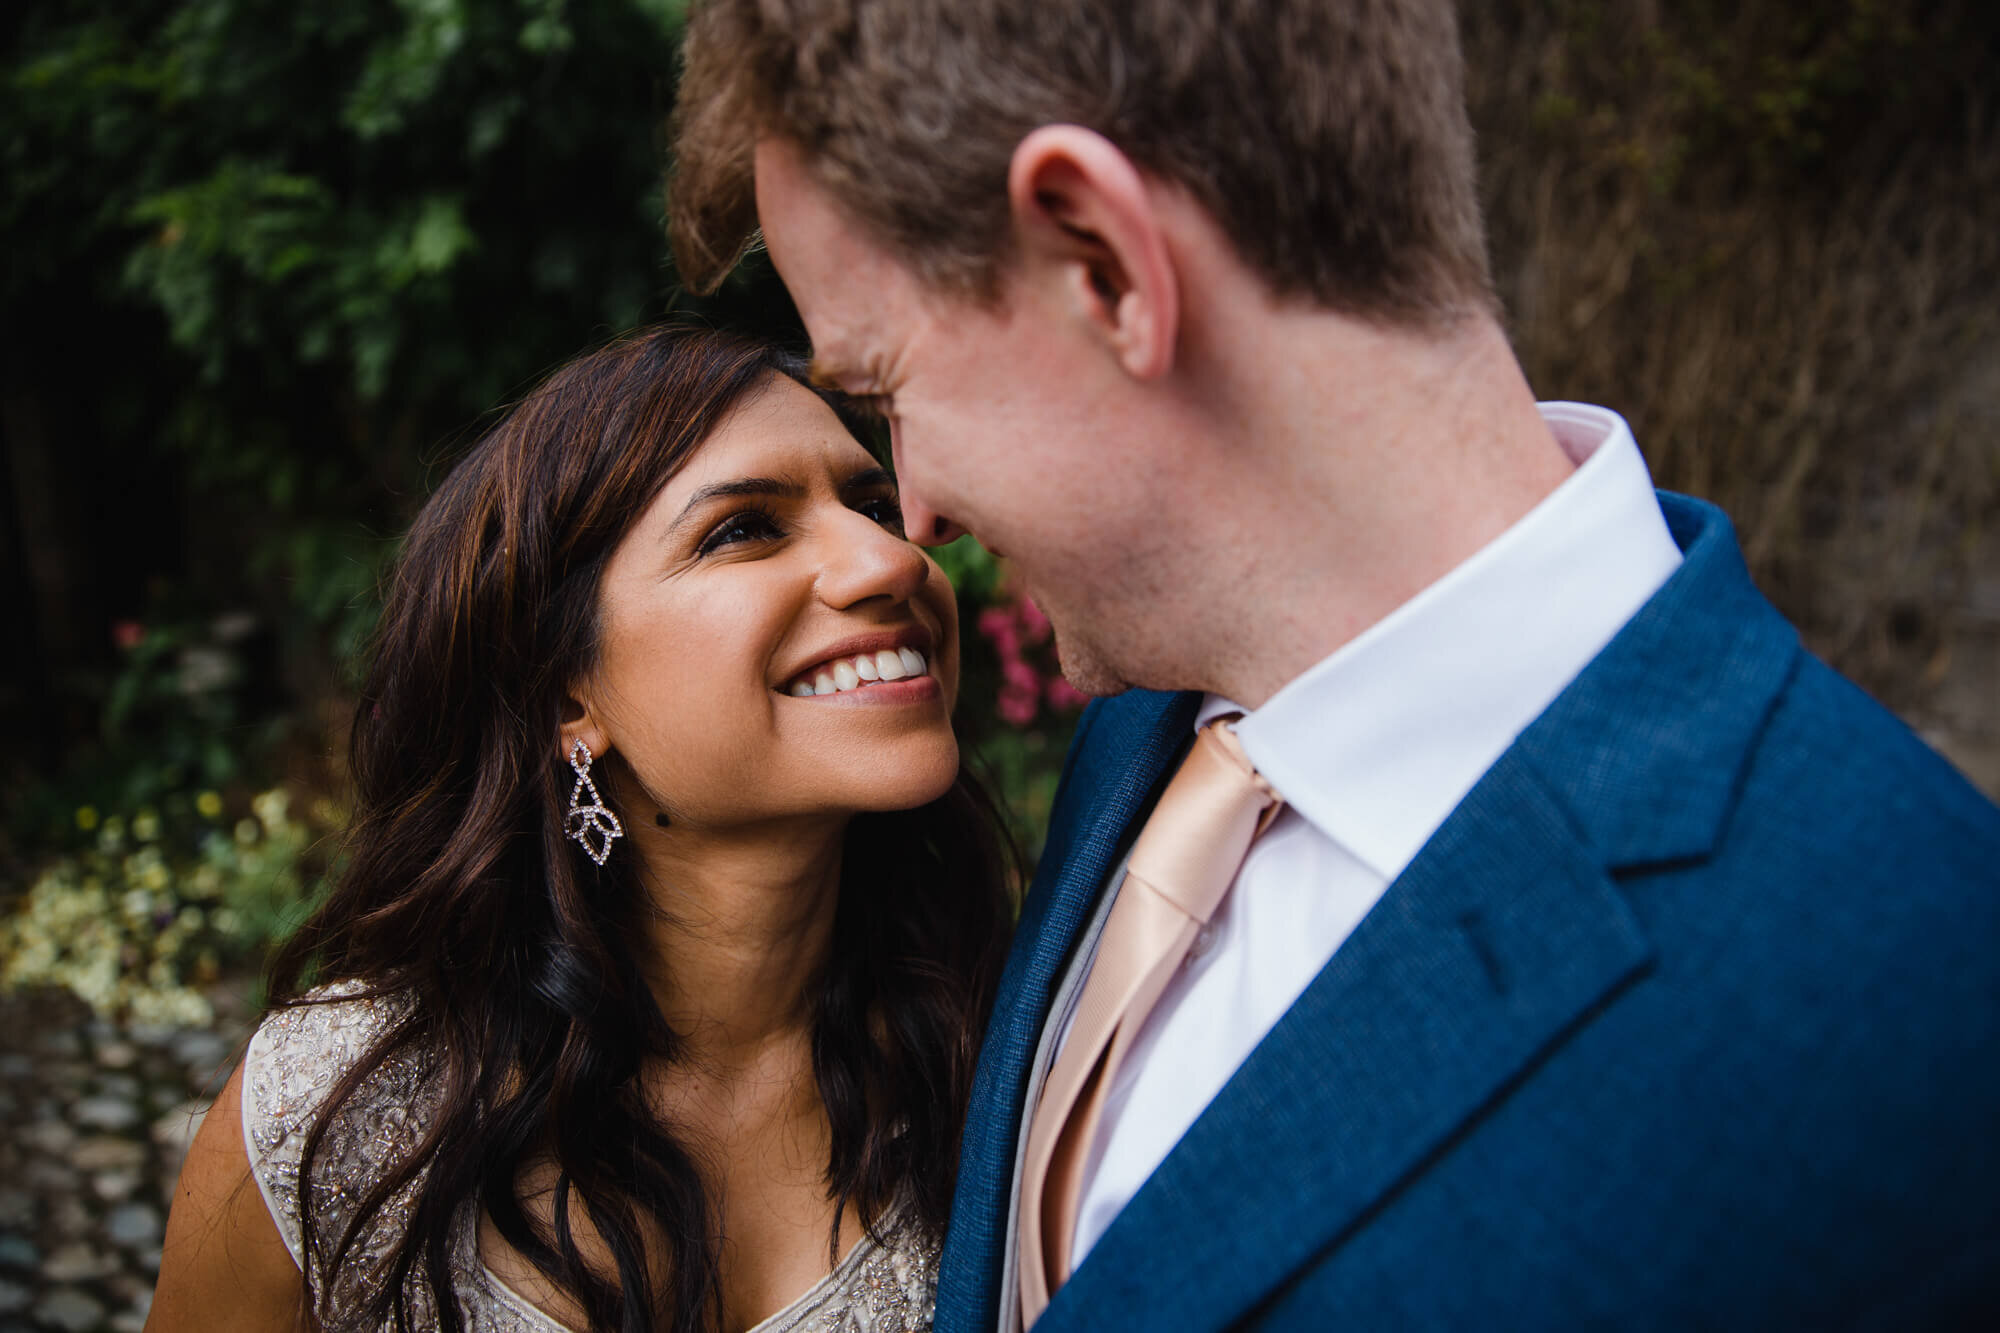 close up portrait of wedding couple sharing moment together